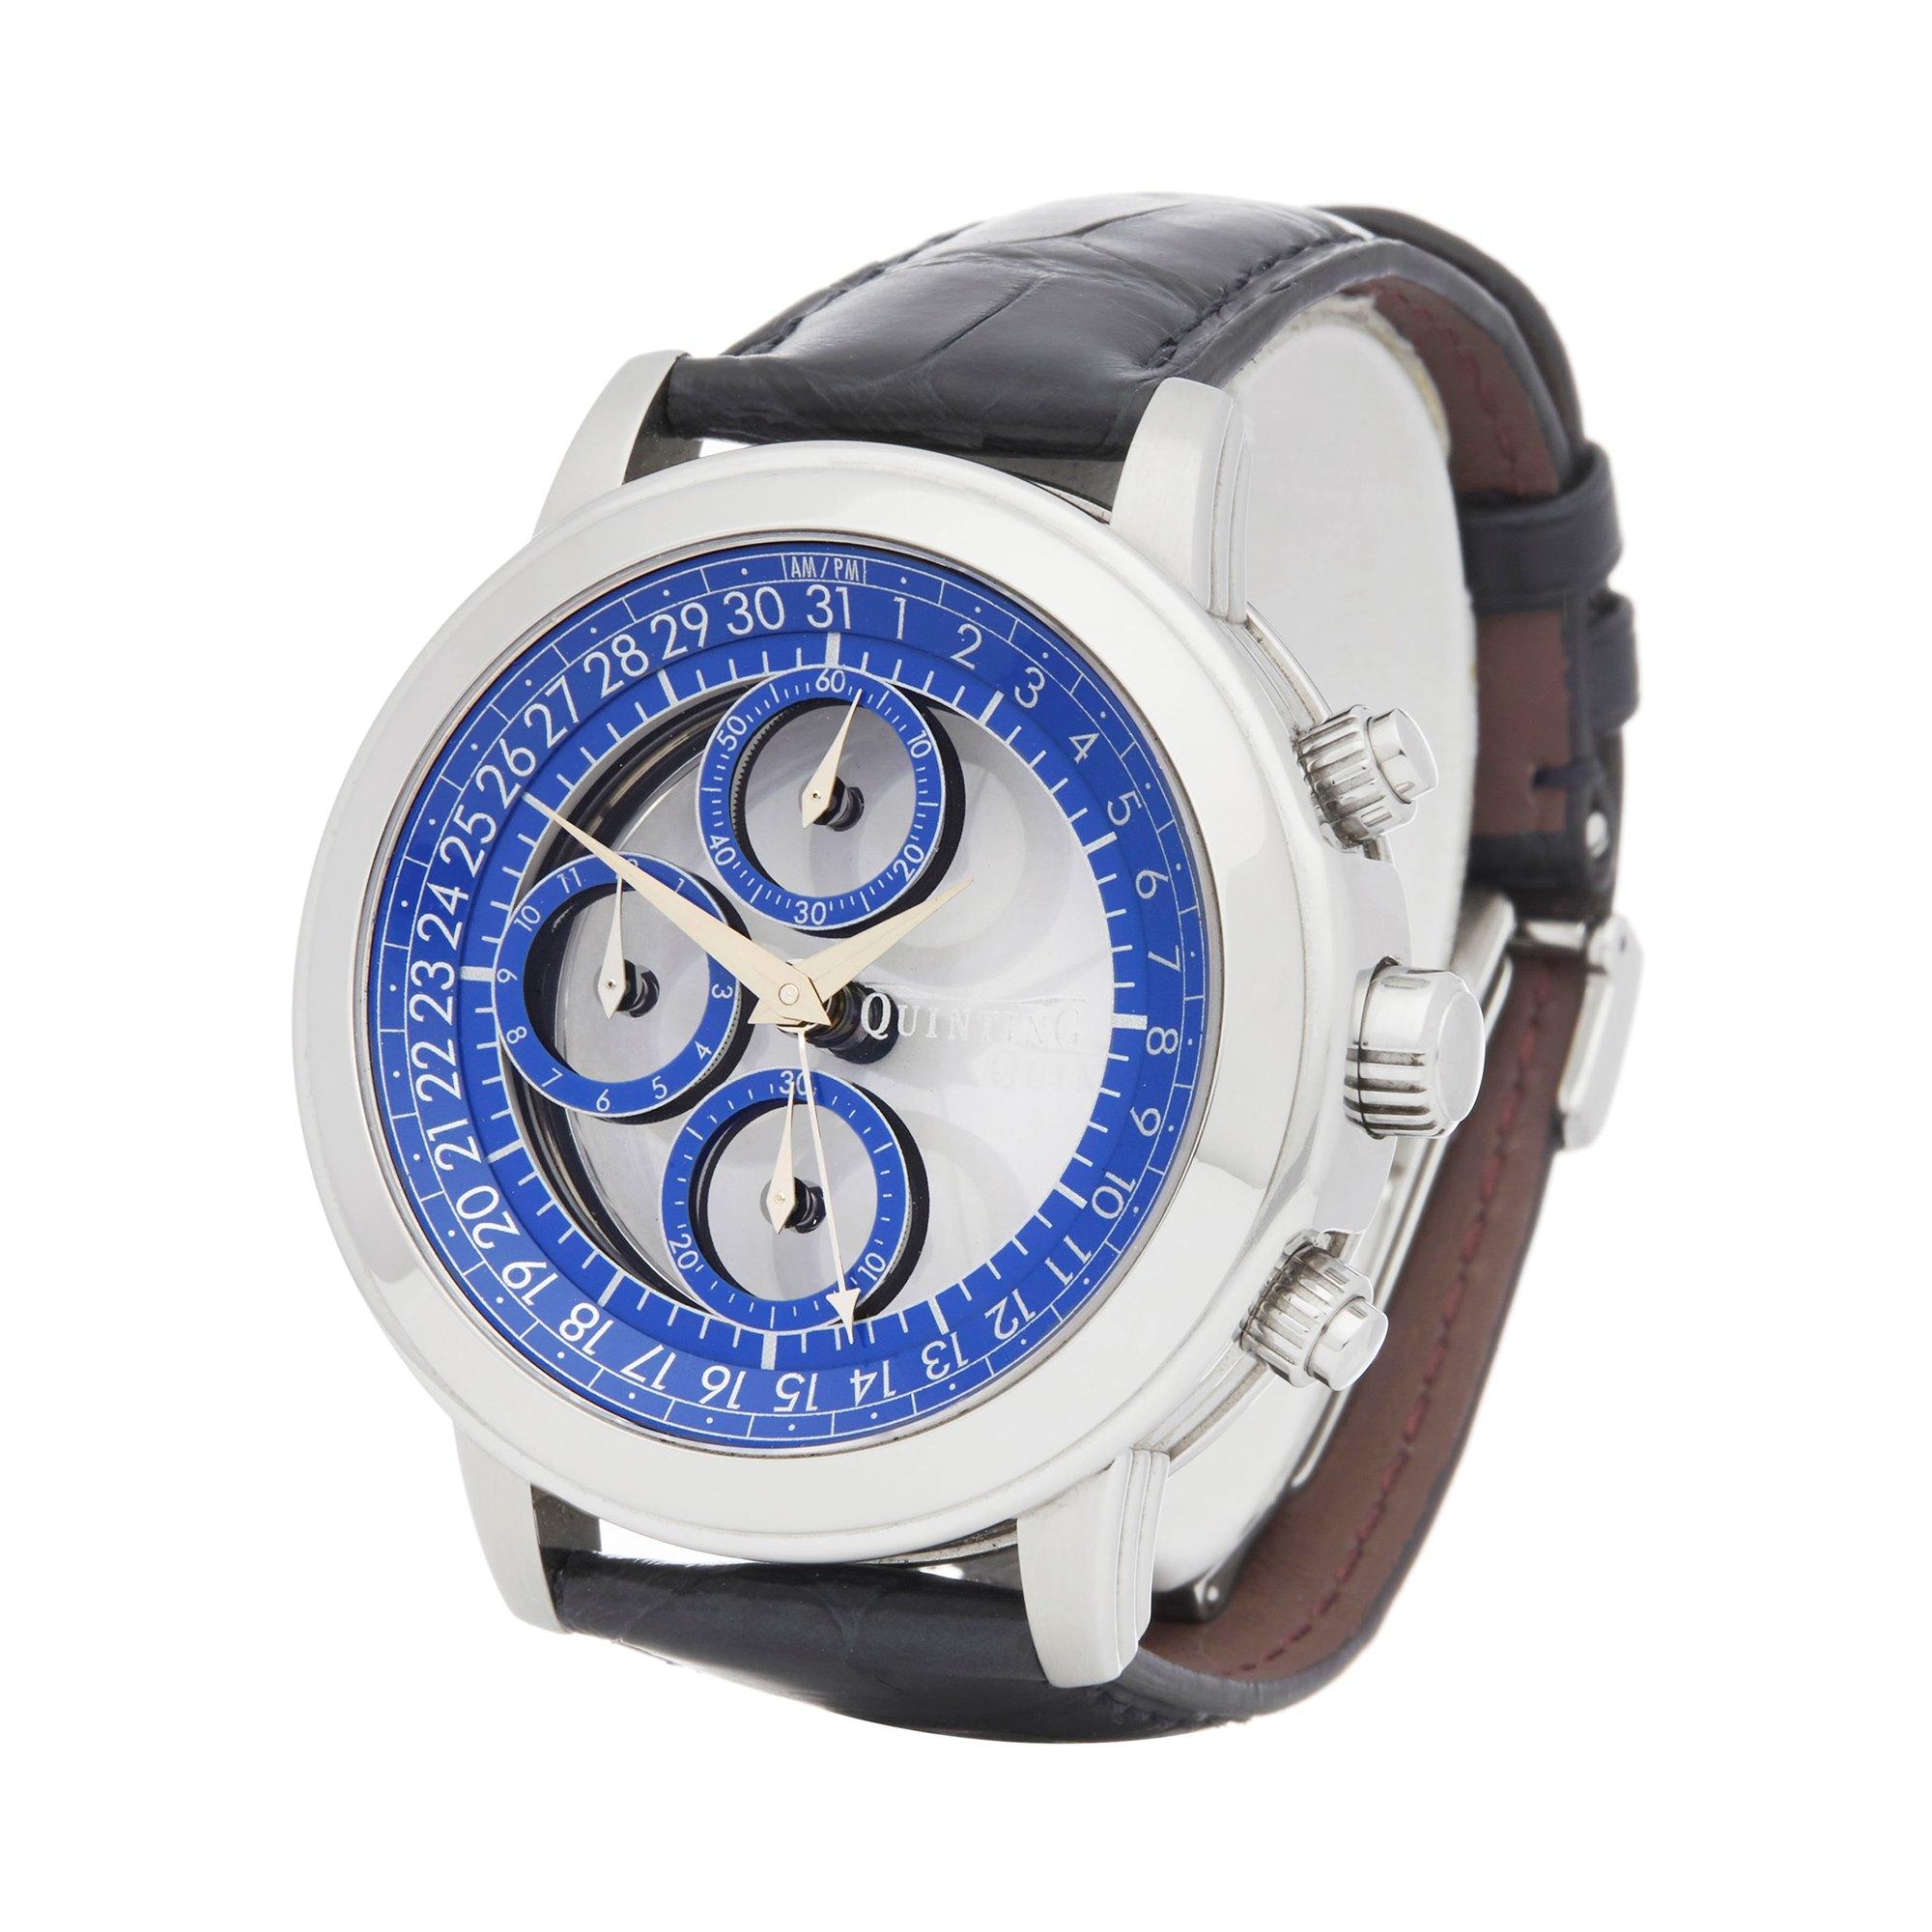 Xupes Reference: COM2221
Manufacturer: Quinting
Model: Mysterious
Model Variant: 
Model Number: 
Age:  Crica 2000
Gender: Men's
Complete With: Ouinting Box & Guarantee 
Dial: Blue Arabic
Glass: Sapphire Crystal
Case Material: Stainless Steel
Strap